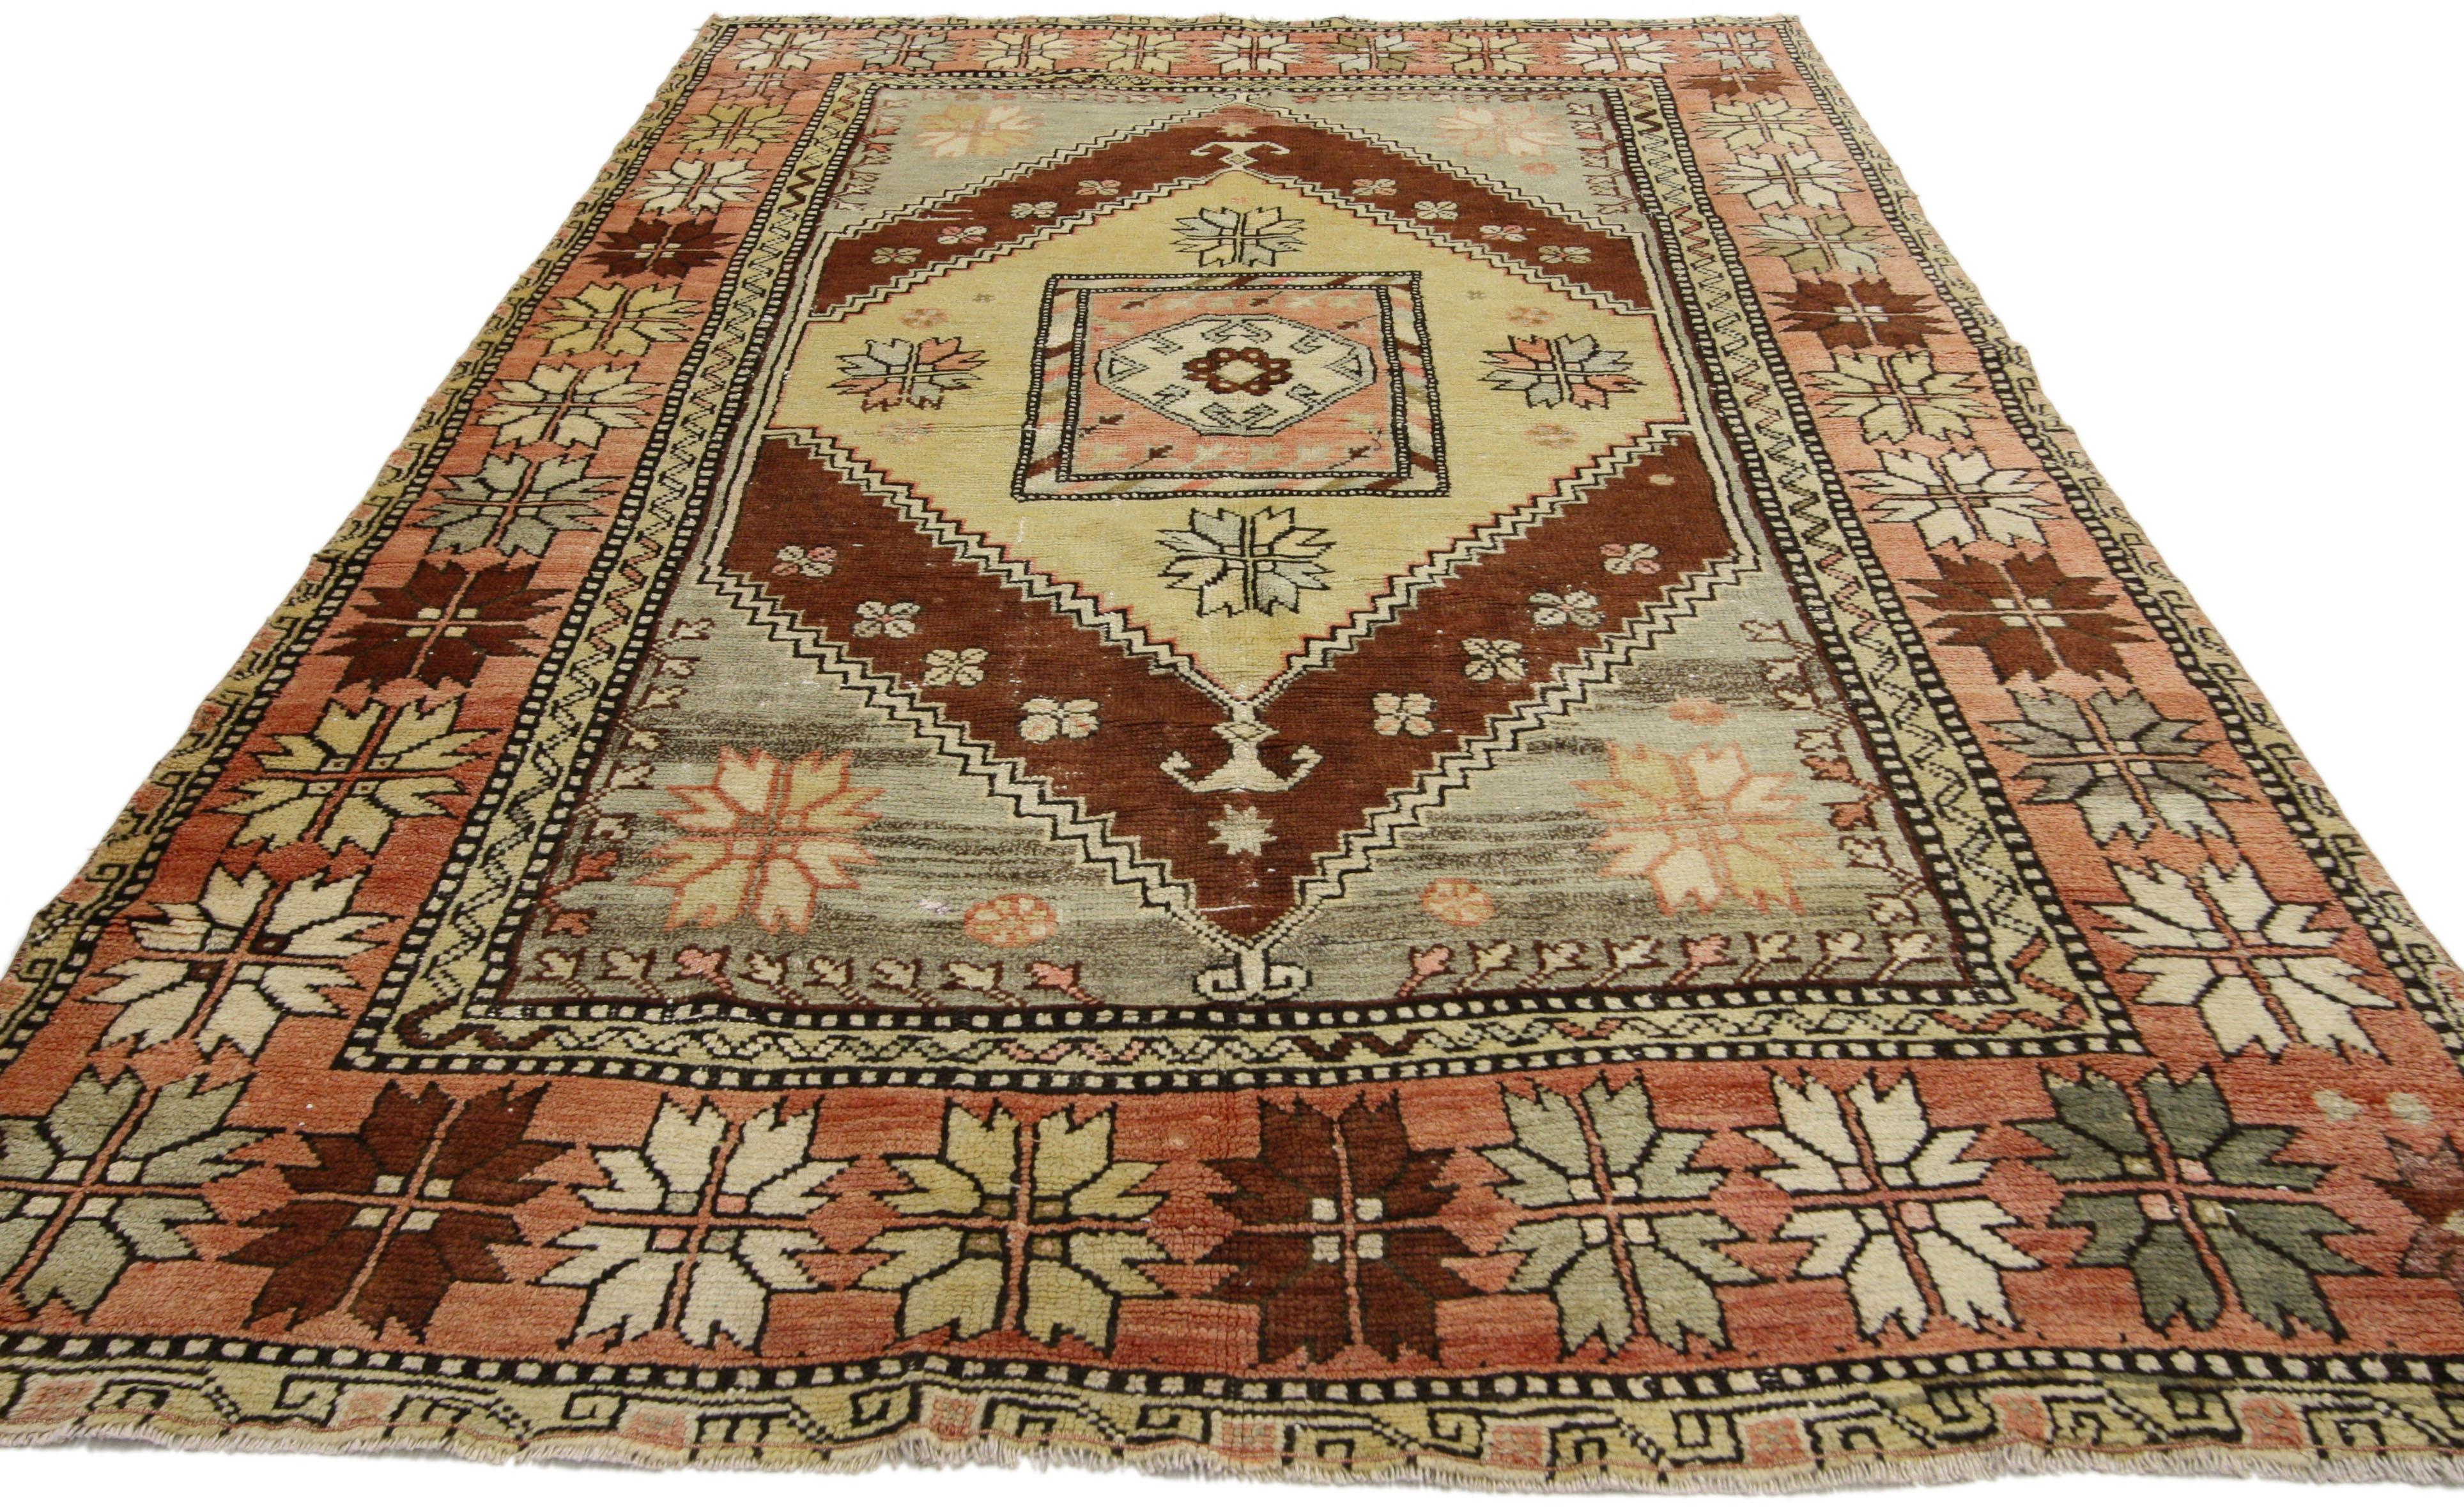 52292, vintage Turkish Oushak rug with modern style, Entry or Foyer rug. This hand-knotted wool vintage Turkish Oushak rug with modern style features a square medallion filled with an amulet dotted by eight-point flowers in a cut-out field with